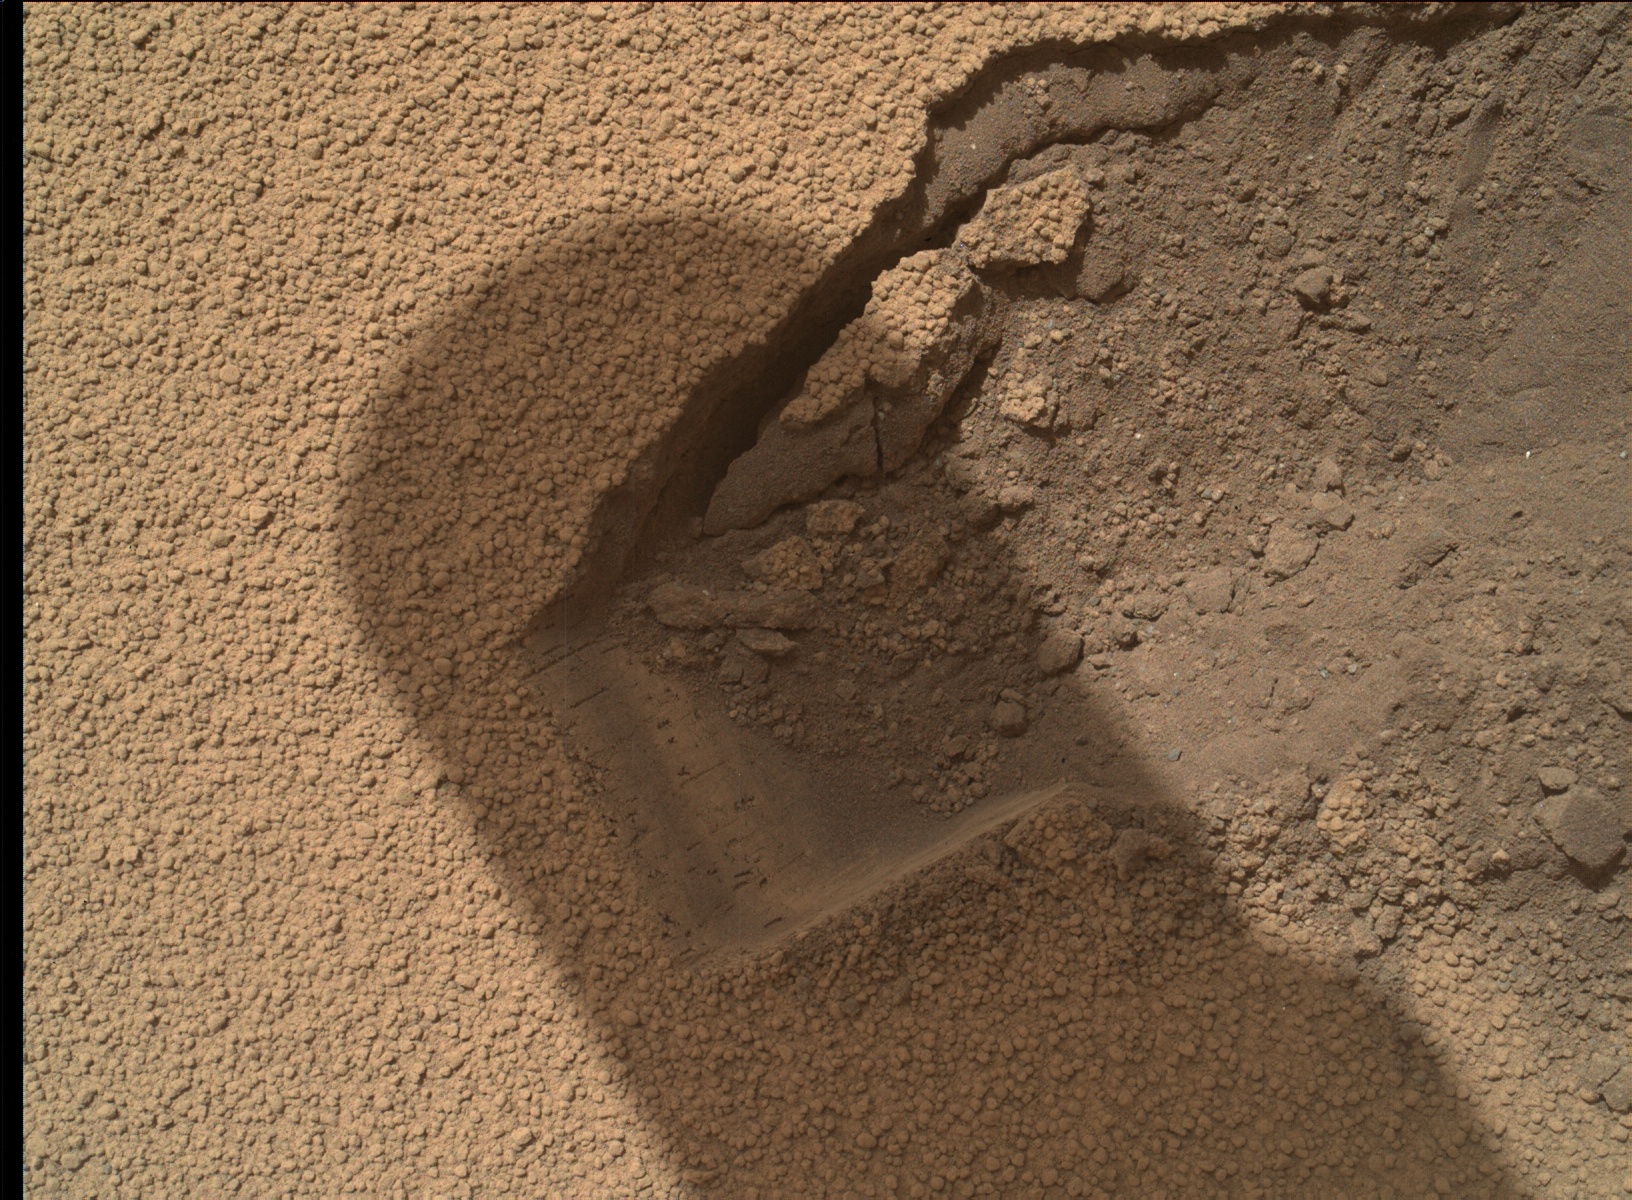 Nasa's Mars rover Curiosity acquired this image using its Mars Hand Lens Imager (MAHLI) on Sol 66